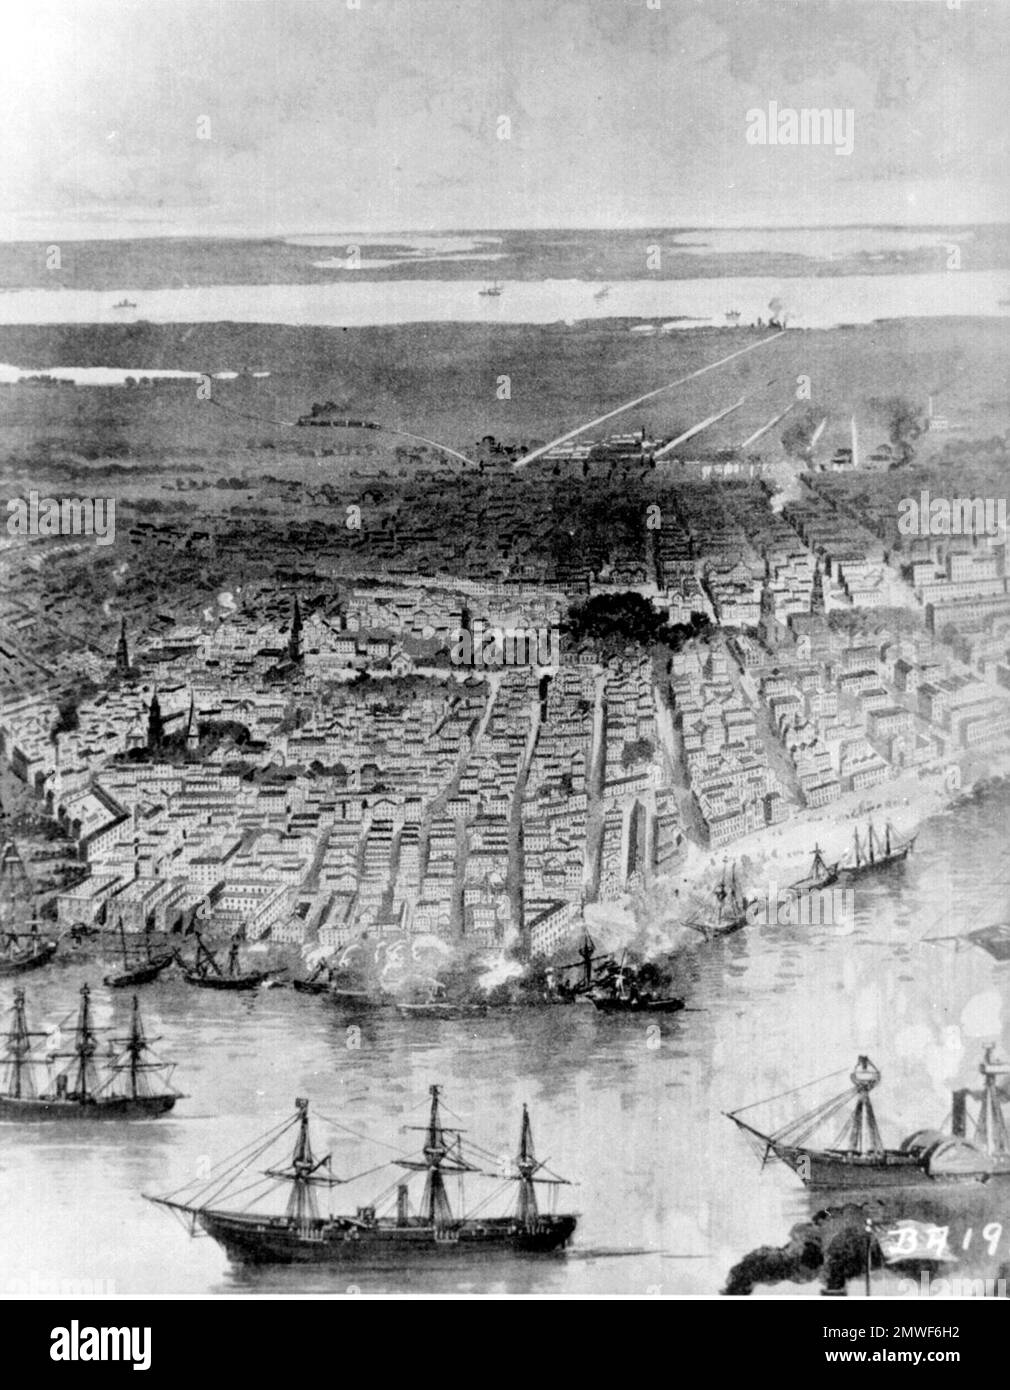 The Battle of Forts Jackson and St. Philip (April 18–28, 1862) was the decisive battle for possession of New Orleans in the American Civil War. The two Confederate forts on the Mississippi River south of the city were attacked by a Union Navy fleet. The bombardment of hte forts was largely ineffective but the passing of Unionist fleet during the night of 24th April 1862 resulted in a battle in which the Confederate fleet was destroyed, and New Orleans fell with no futher fighting. This image shows the Unionist fleet at anchor in the Mississippi at New Orleans ca. 1862. Stock Photo